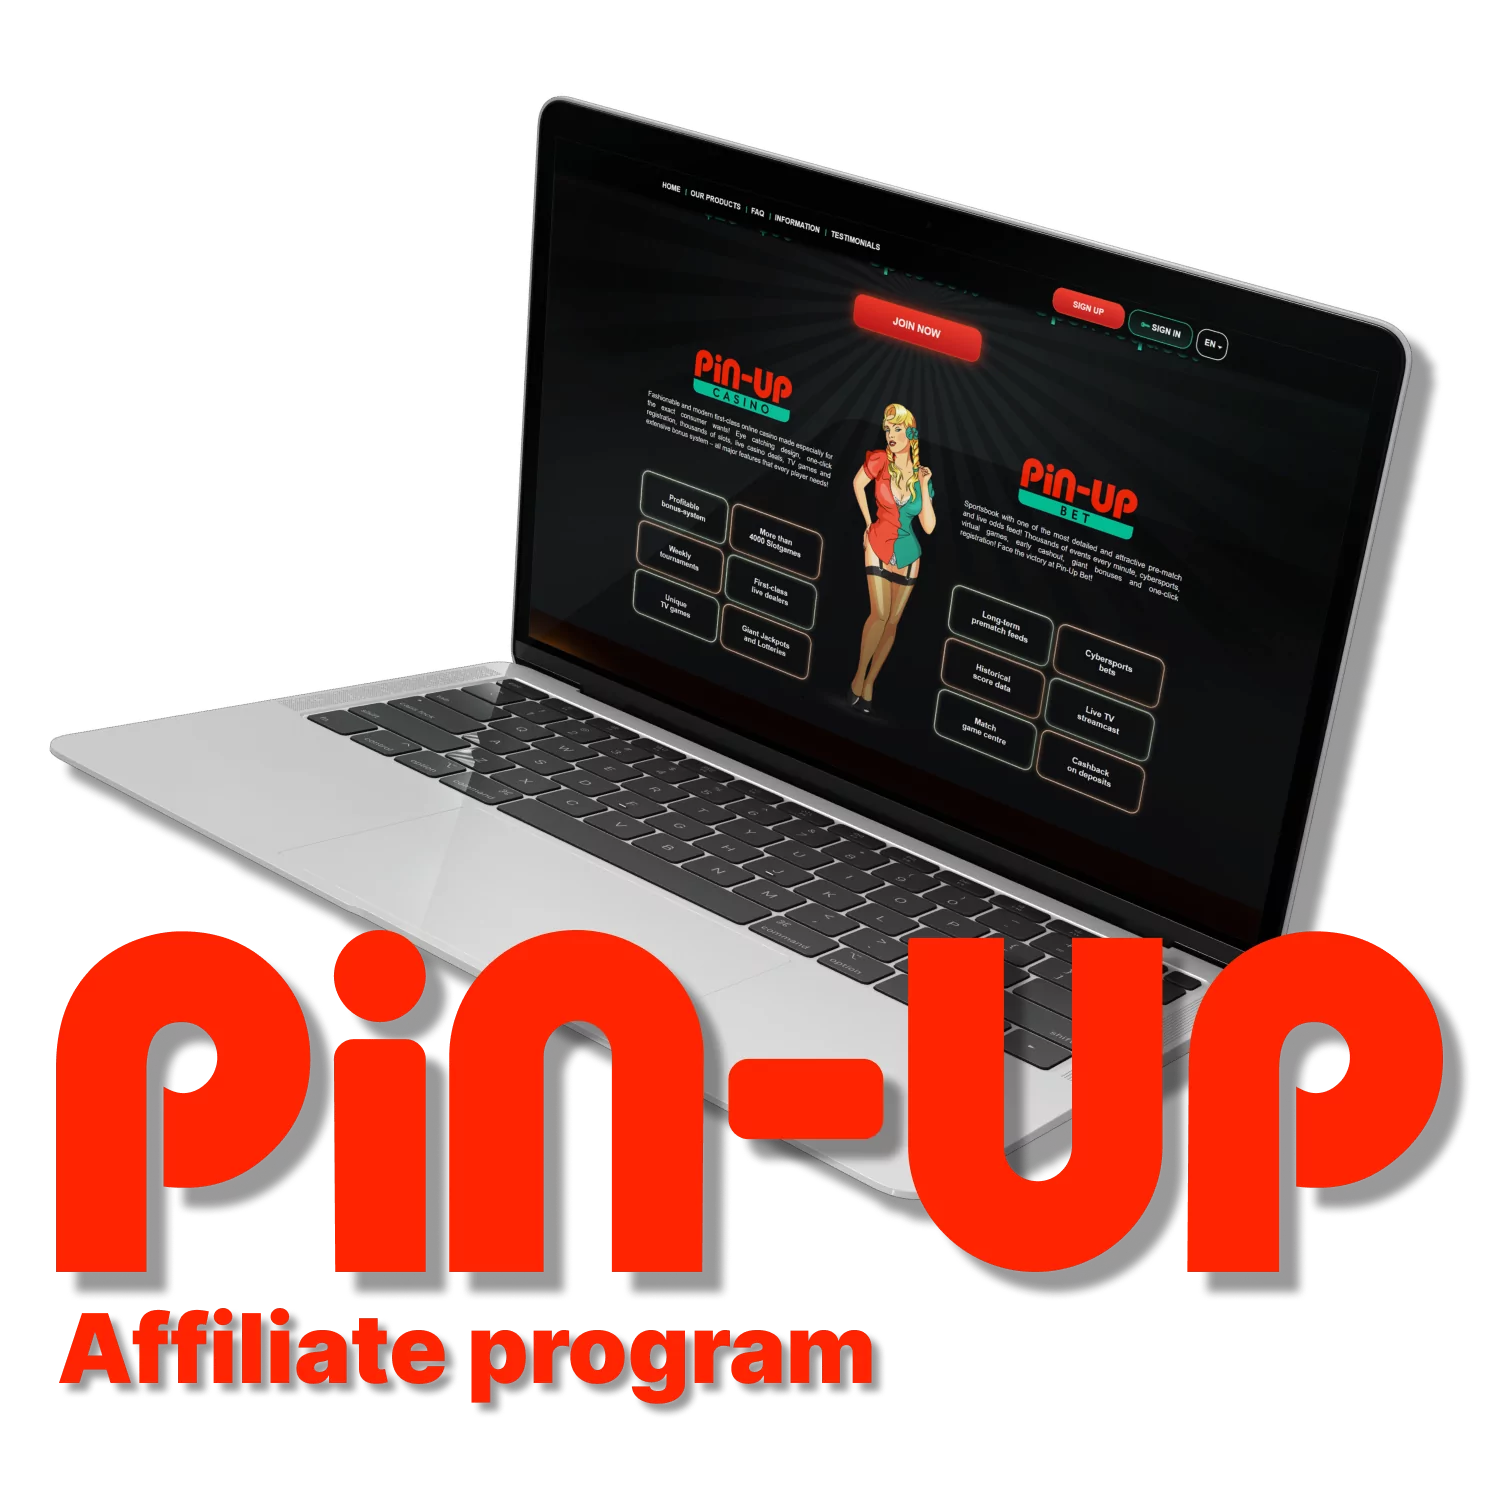 A profitable Pin-Up affiliate program is available to you.